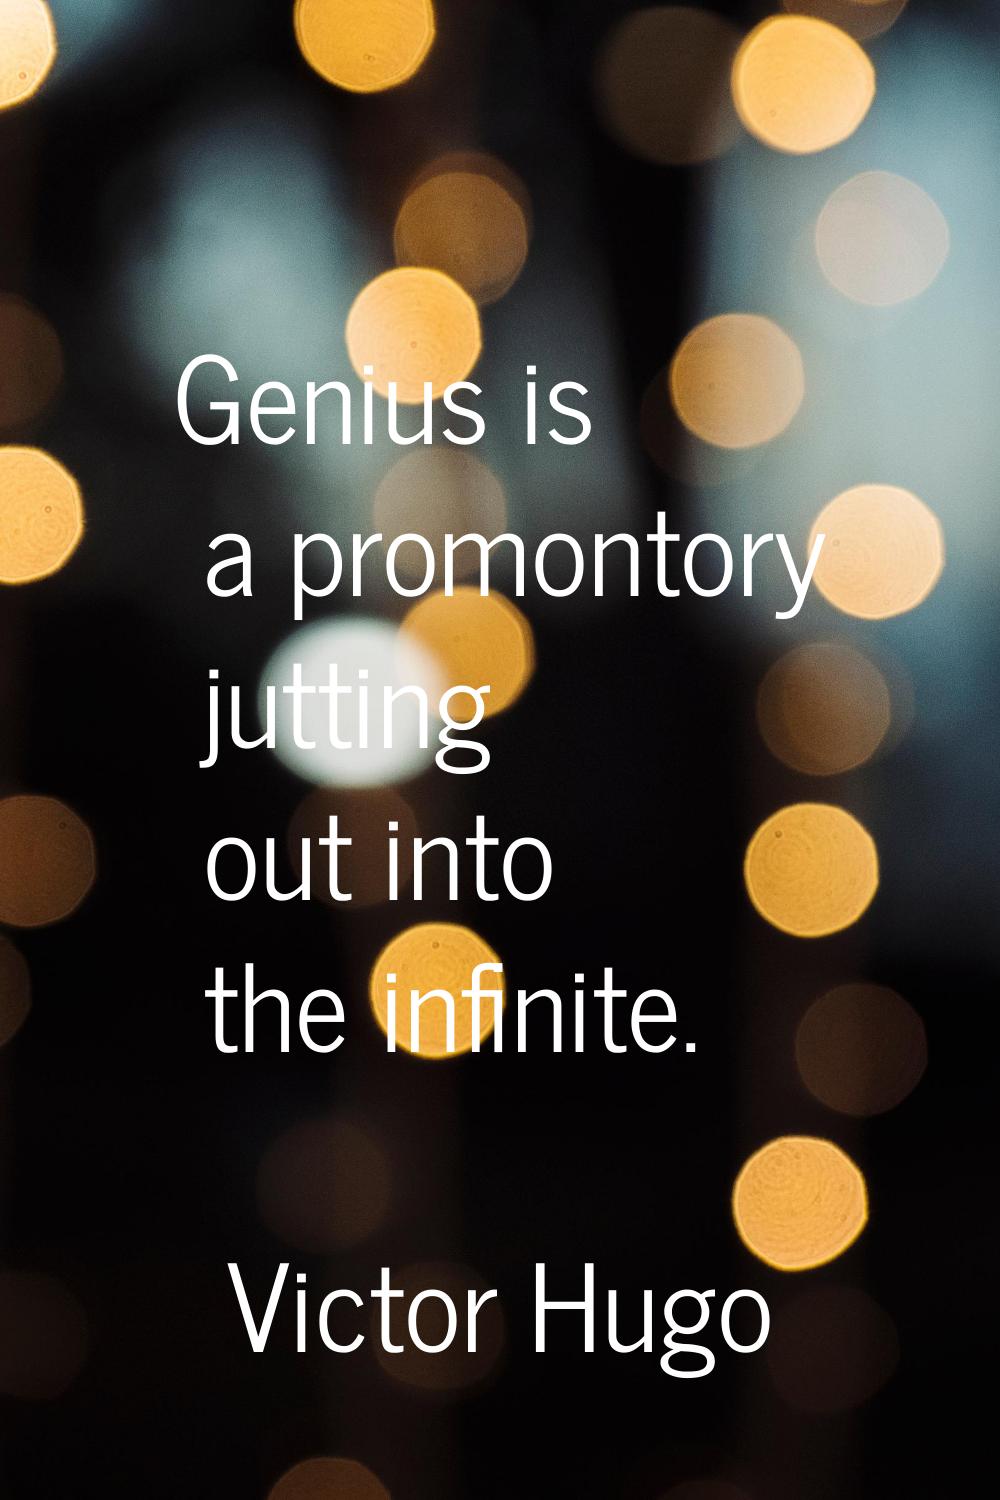 Genius is a promontory jutting out into the infinite.